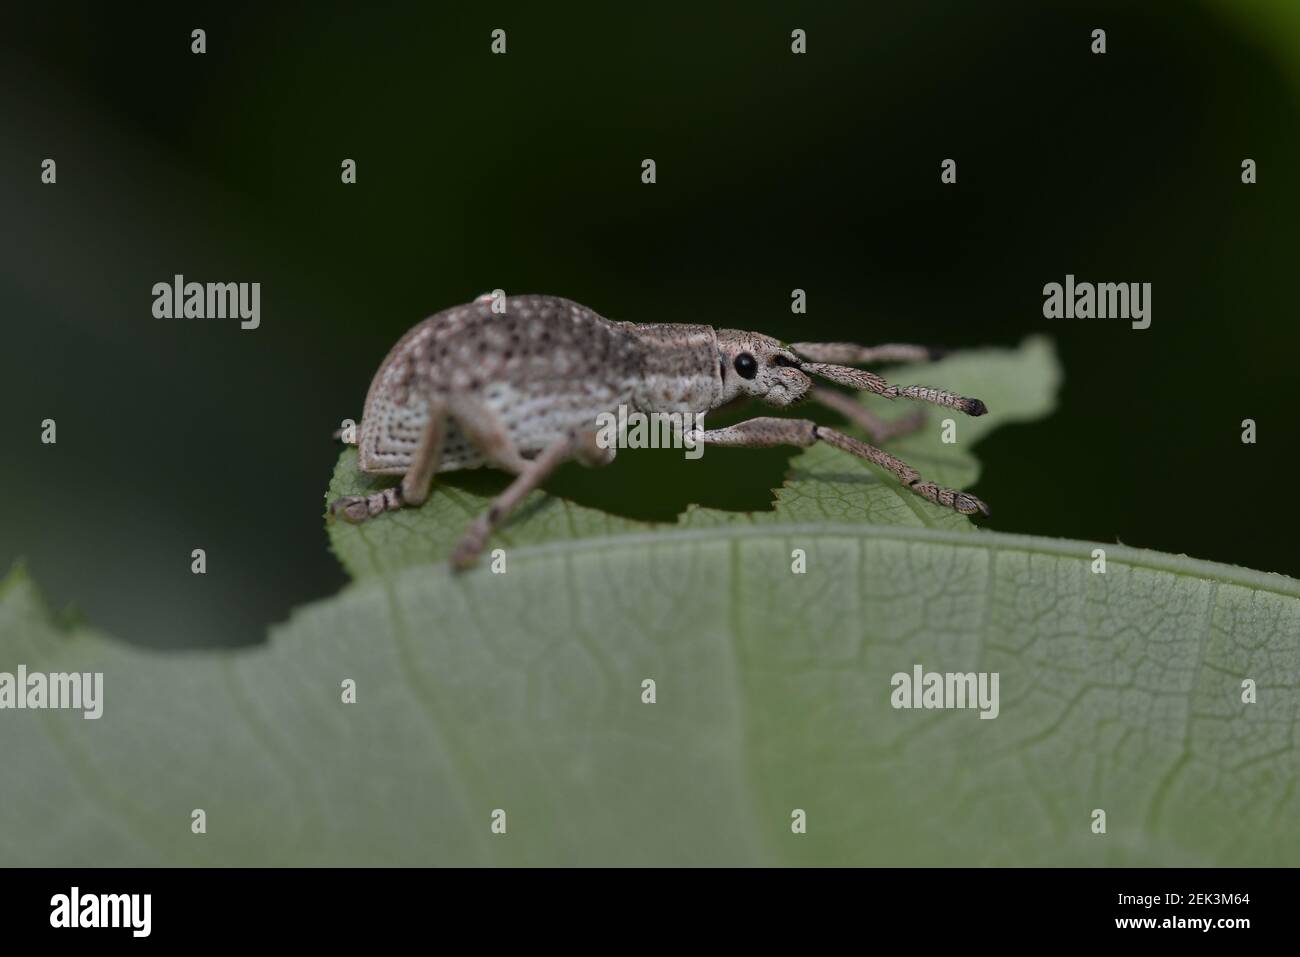 Weevil, Curculionoidea Family, feeding on leaf, Klungkung, Bali, Indonesia Stock Photo